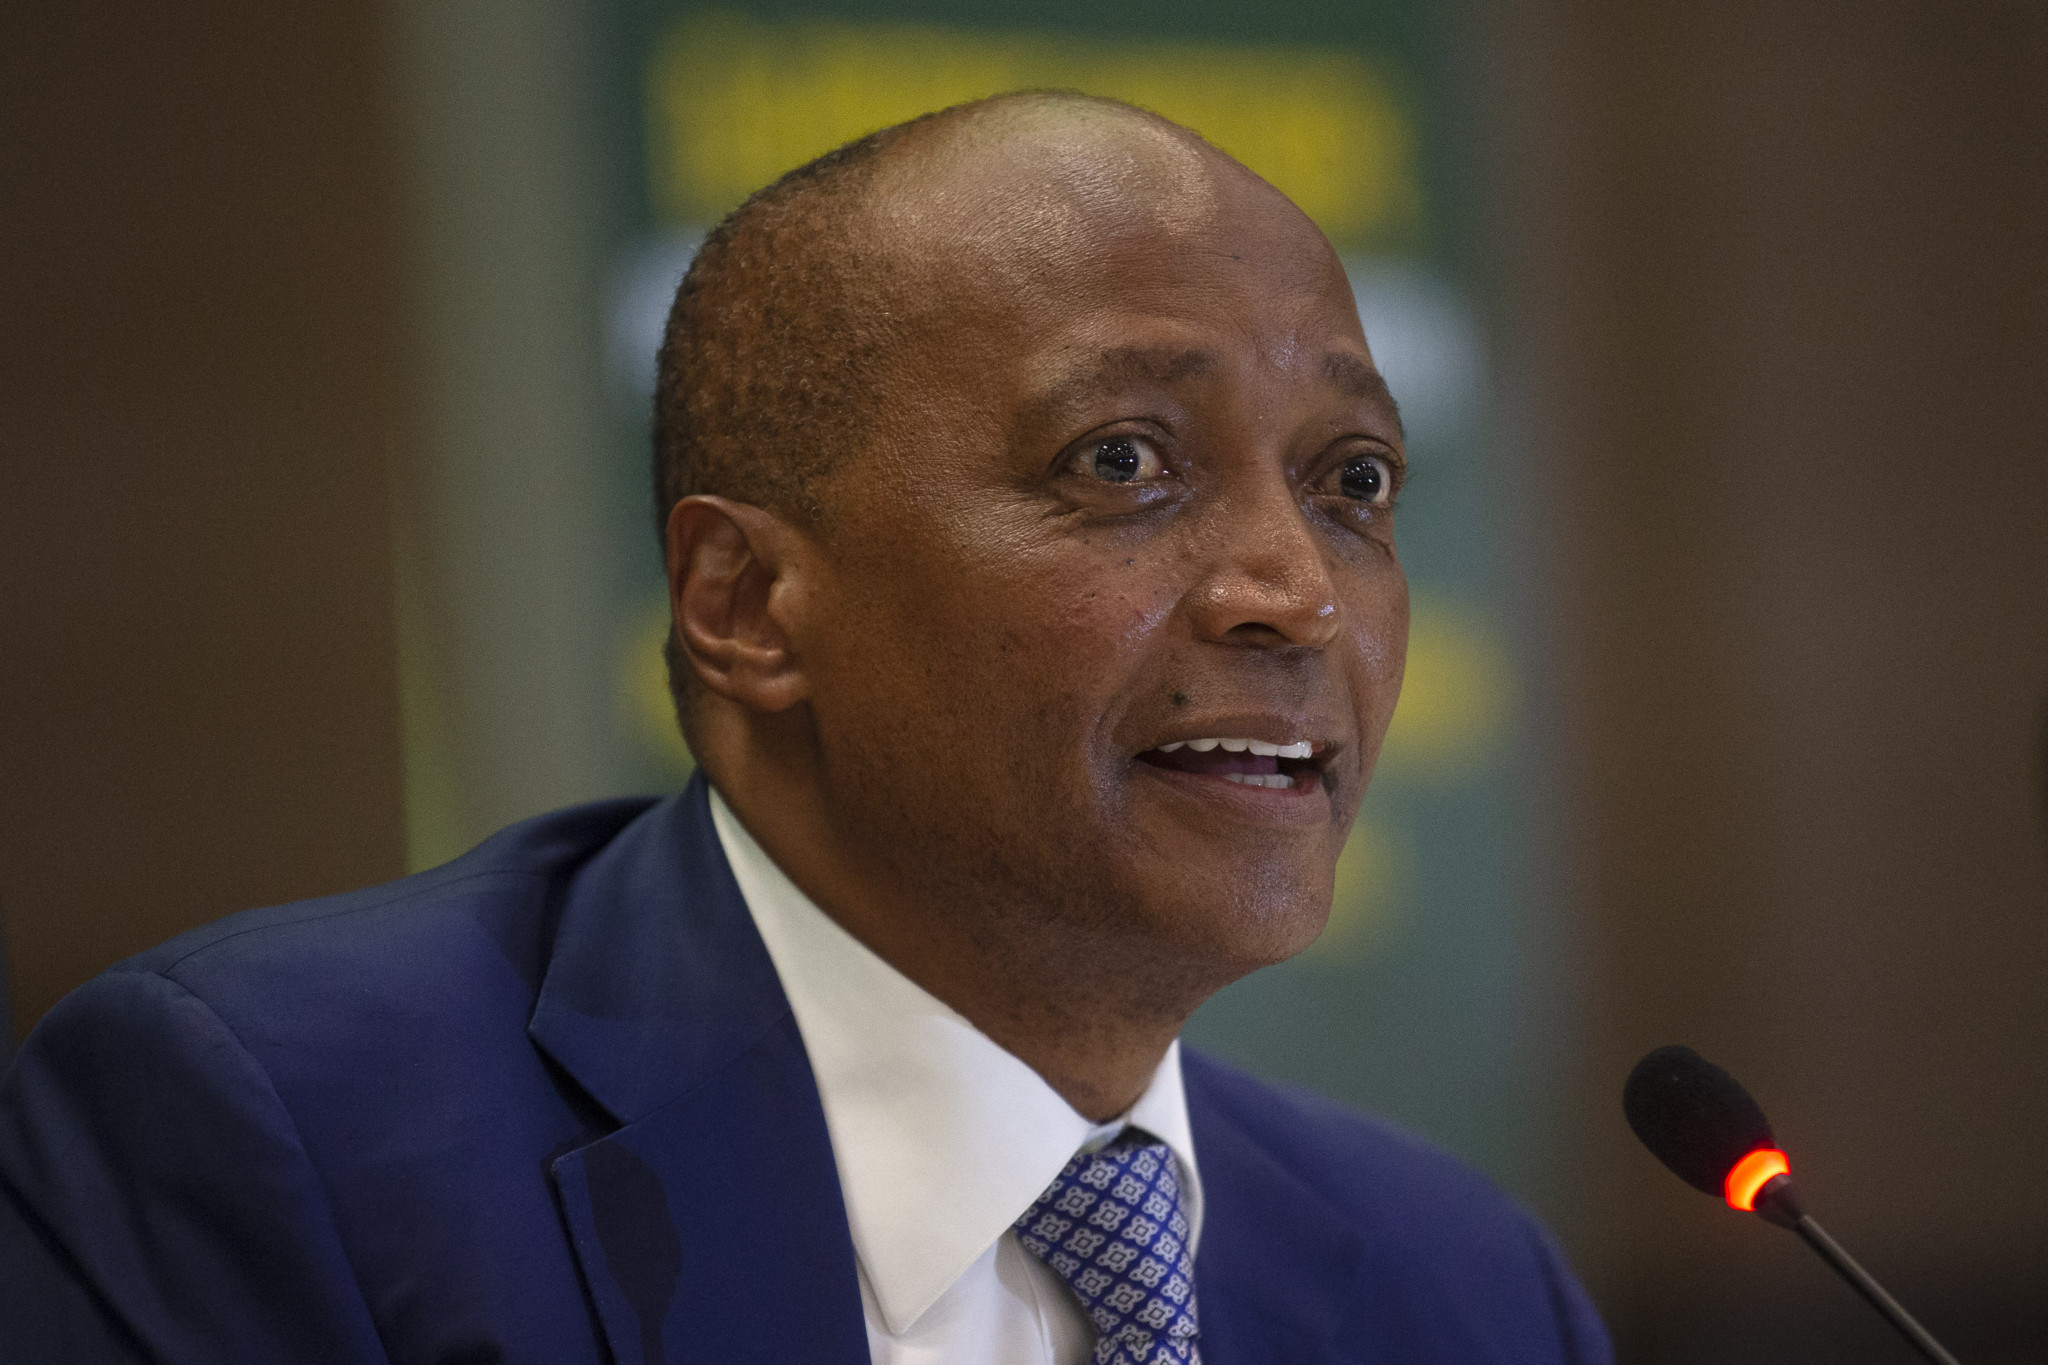 CAF President Patrice Motsepe made the final decision to postpone the Africa Cup of Nations after meeting with advisors ©Getty Images